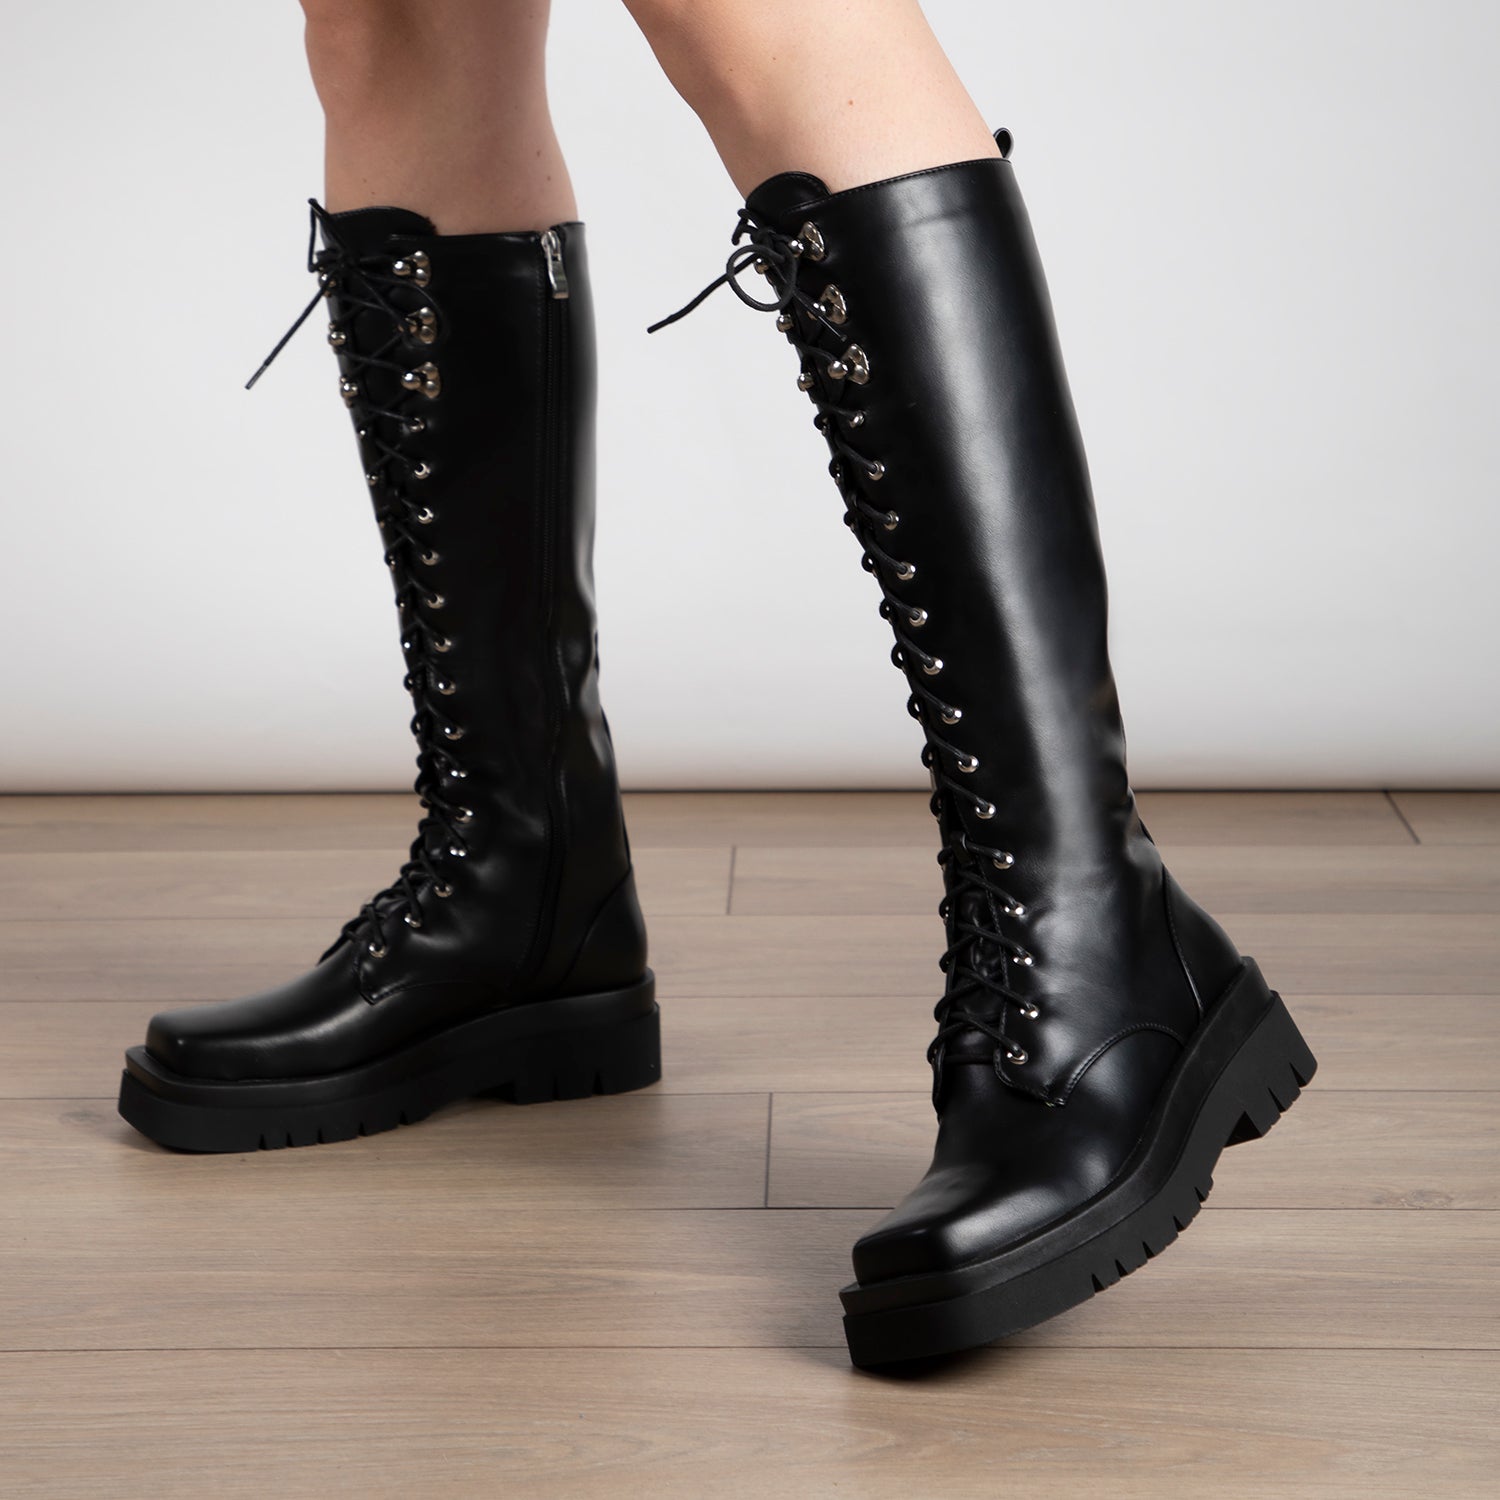 Women's Thigh High Boots Ladies Stretchy Winter Lace Up Over Knee Long Heel  Shoe | eBay